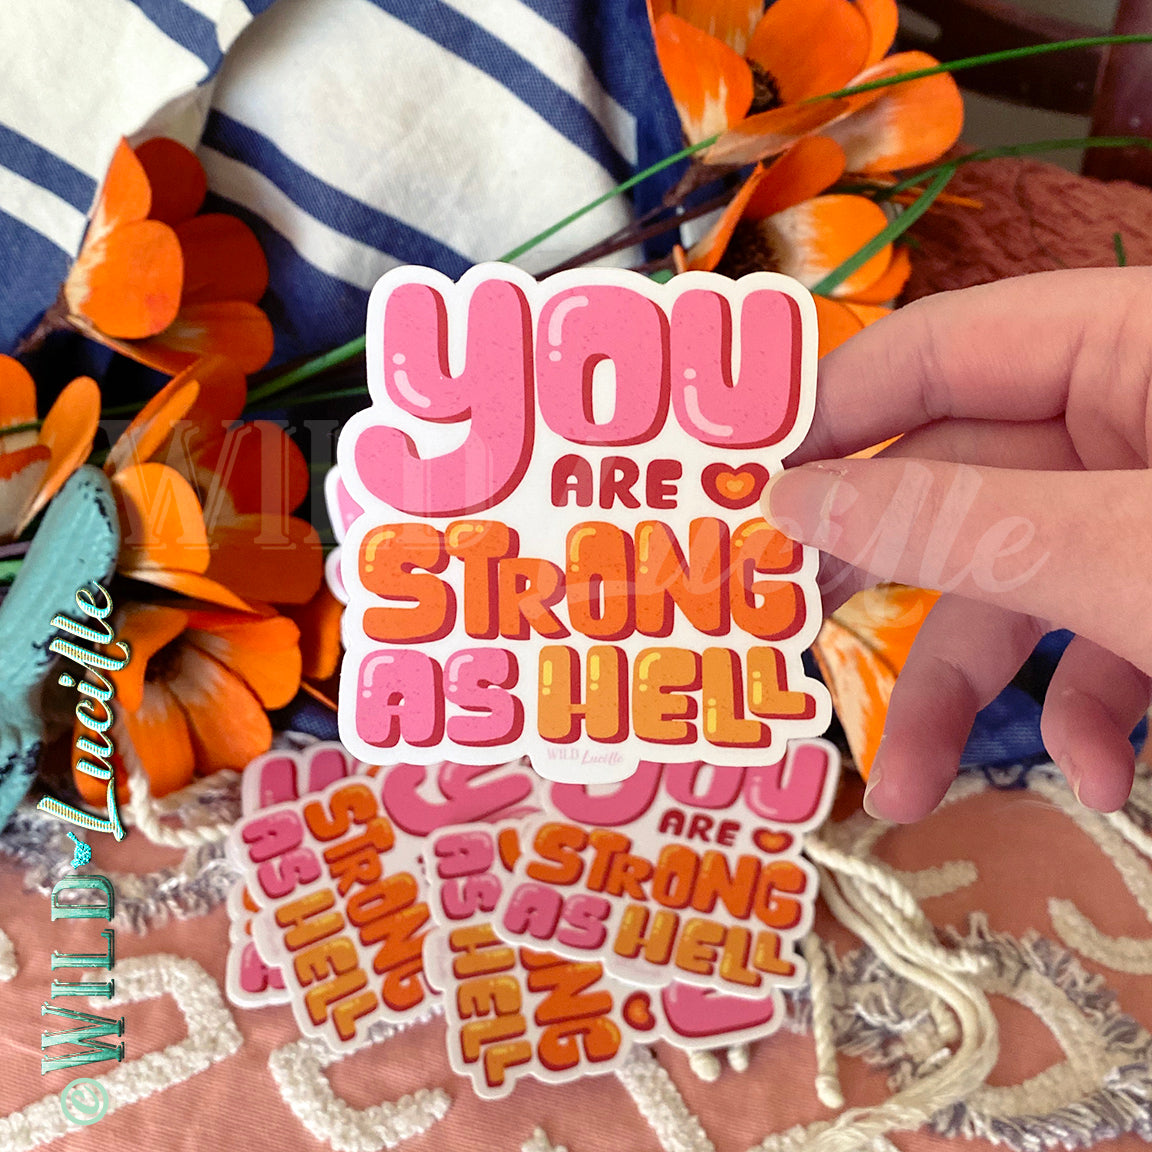 You Are Strong As Hell - Inspirational Vinyl Sticker Decals